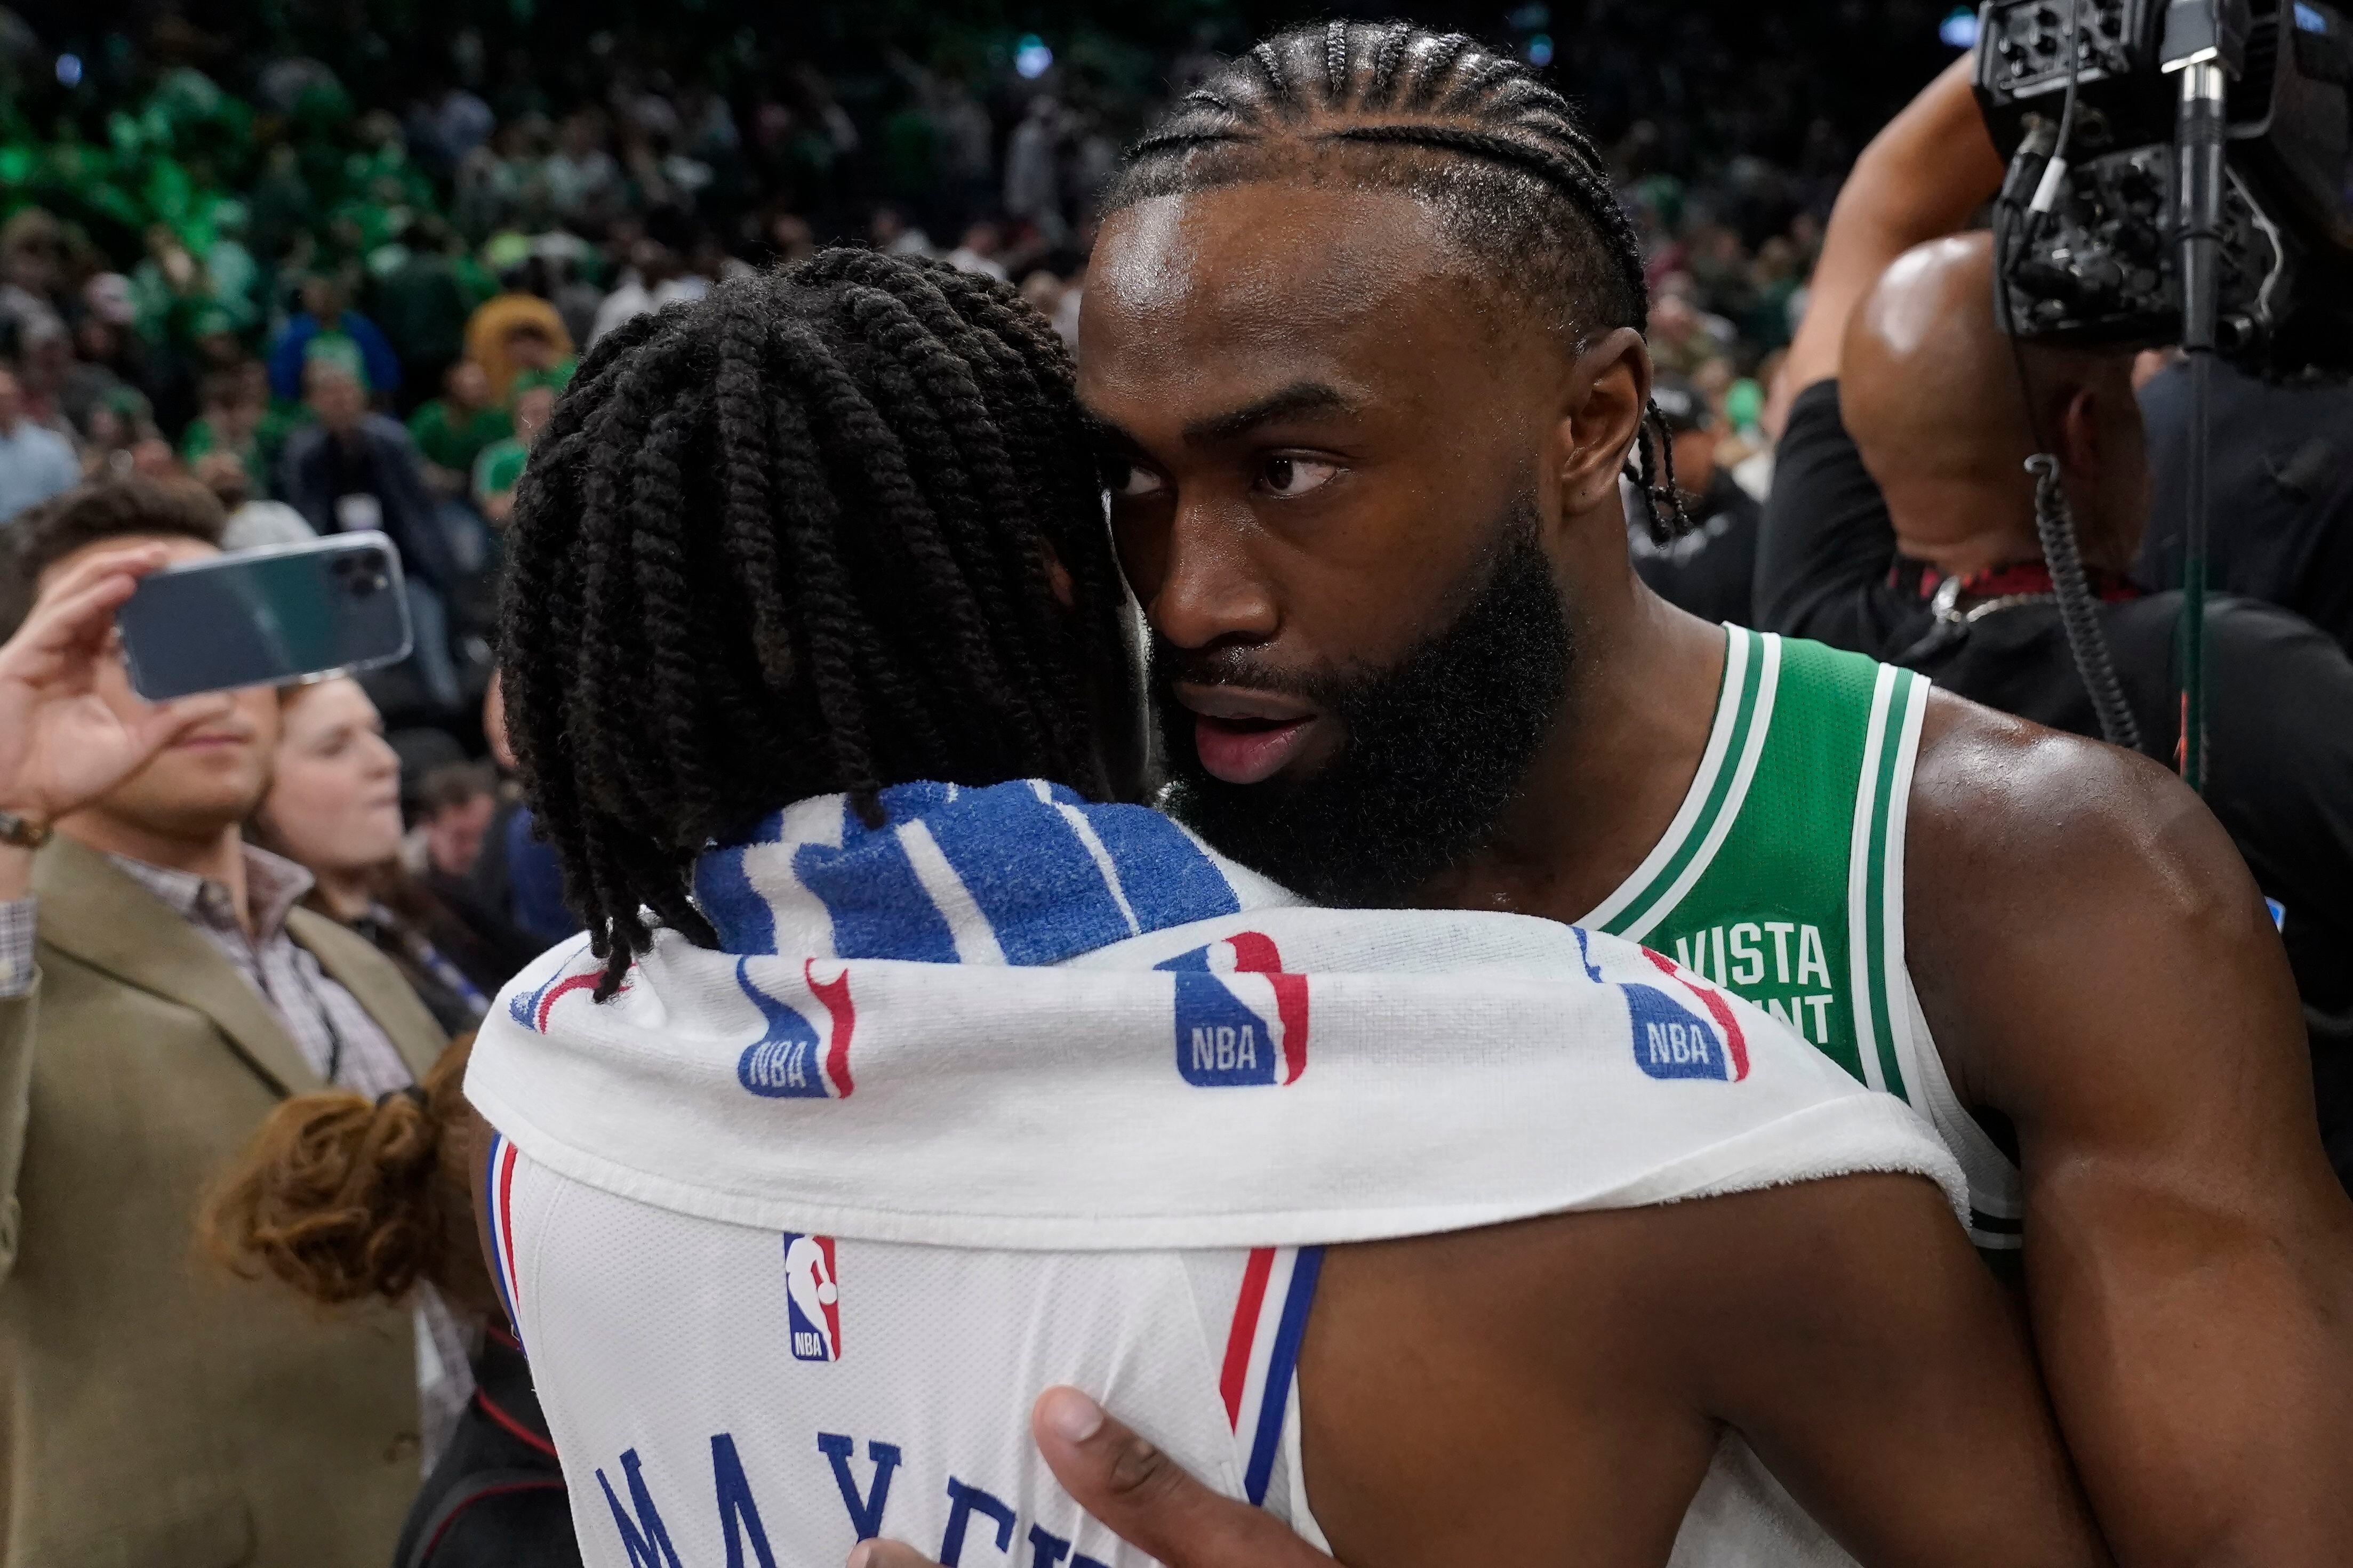 Celtics beat 76ers 112-88, Tatum sets Game 7 record with 51 points